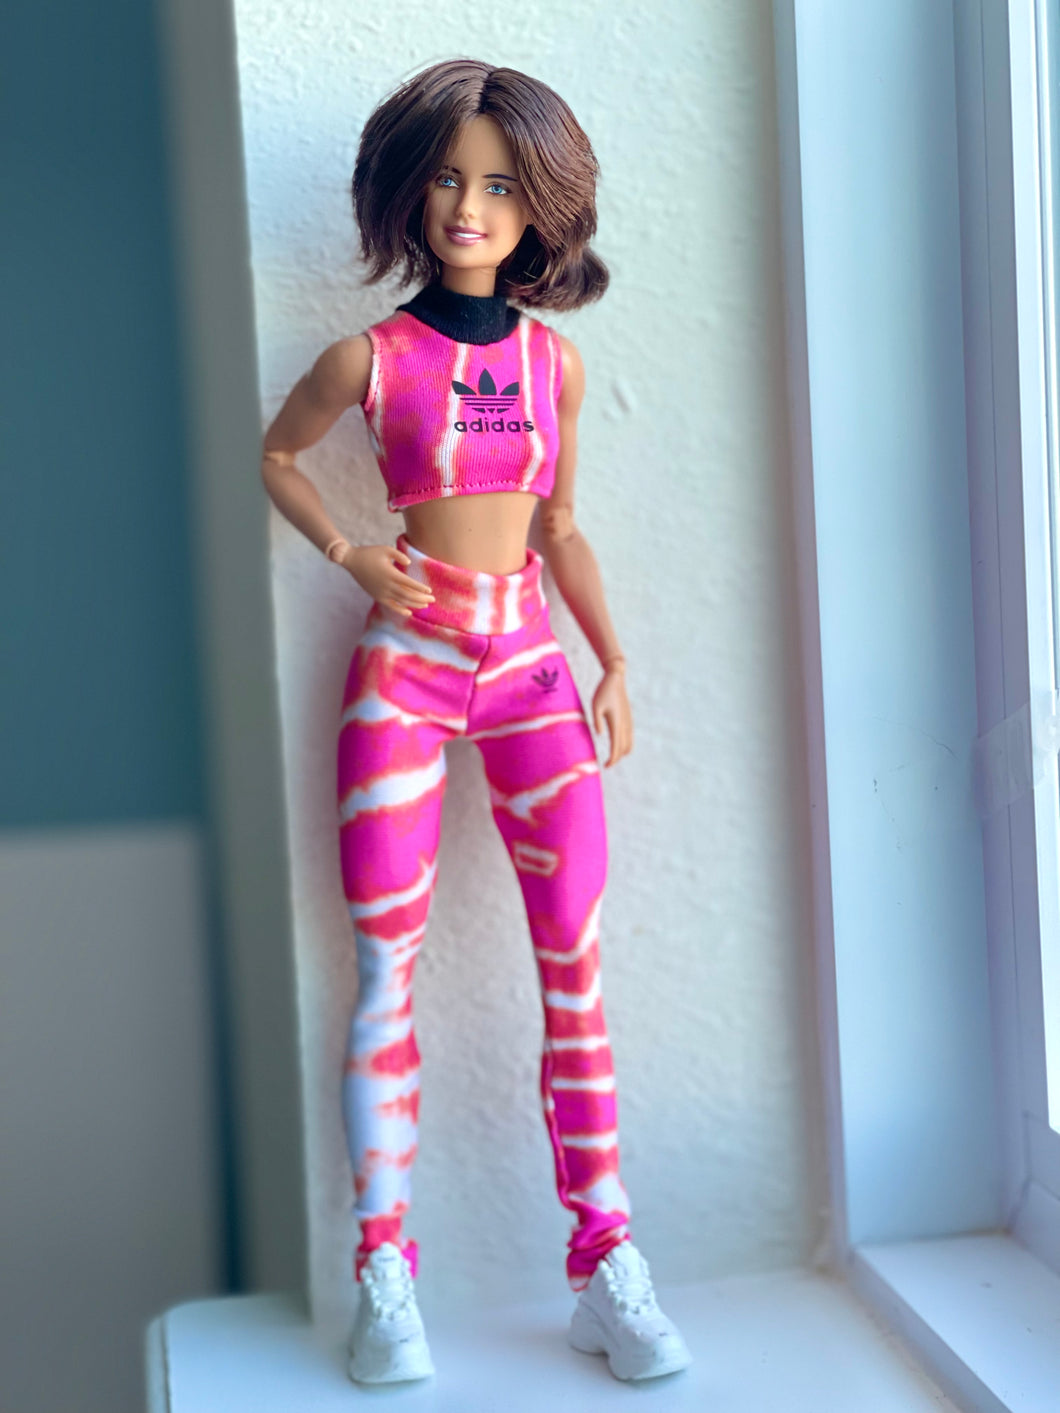 Tie dye yoga pants and crop top for fashion dolls